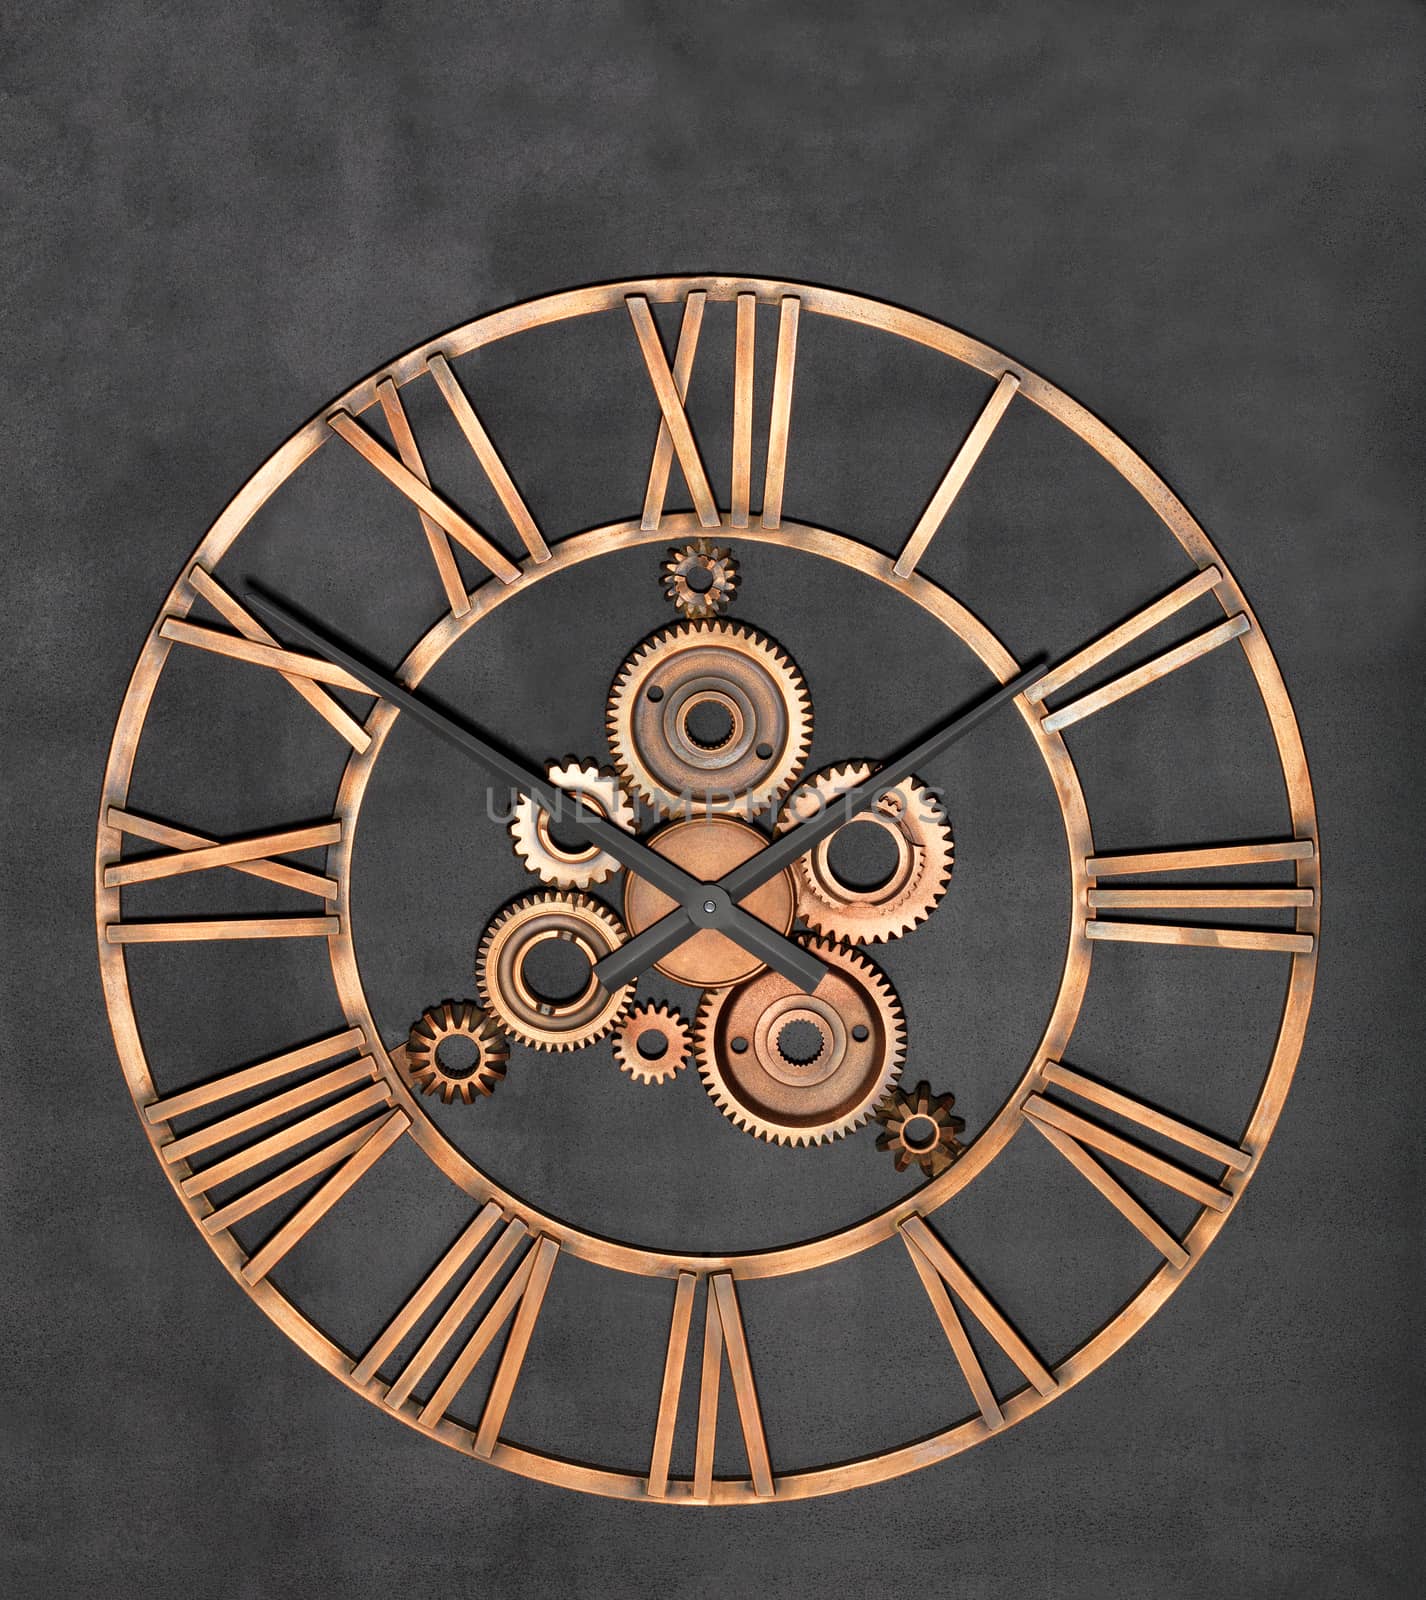 Unusual industrial wall clock made of metal and real gears on a granite black background. by Sergii